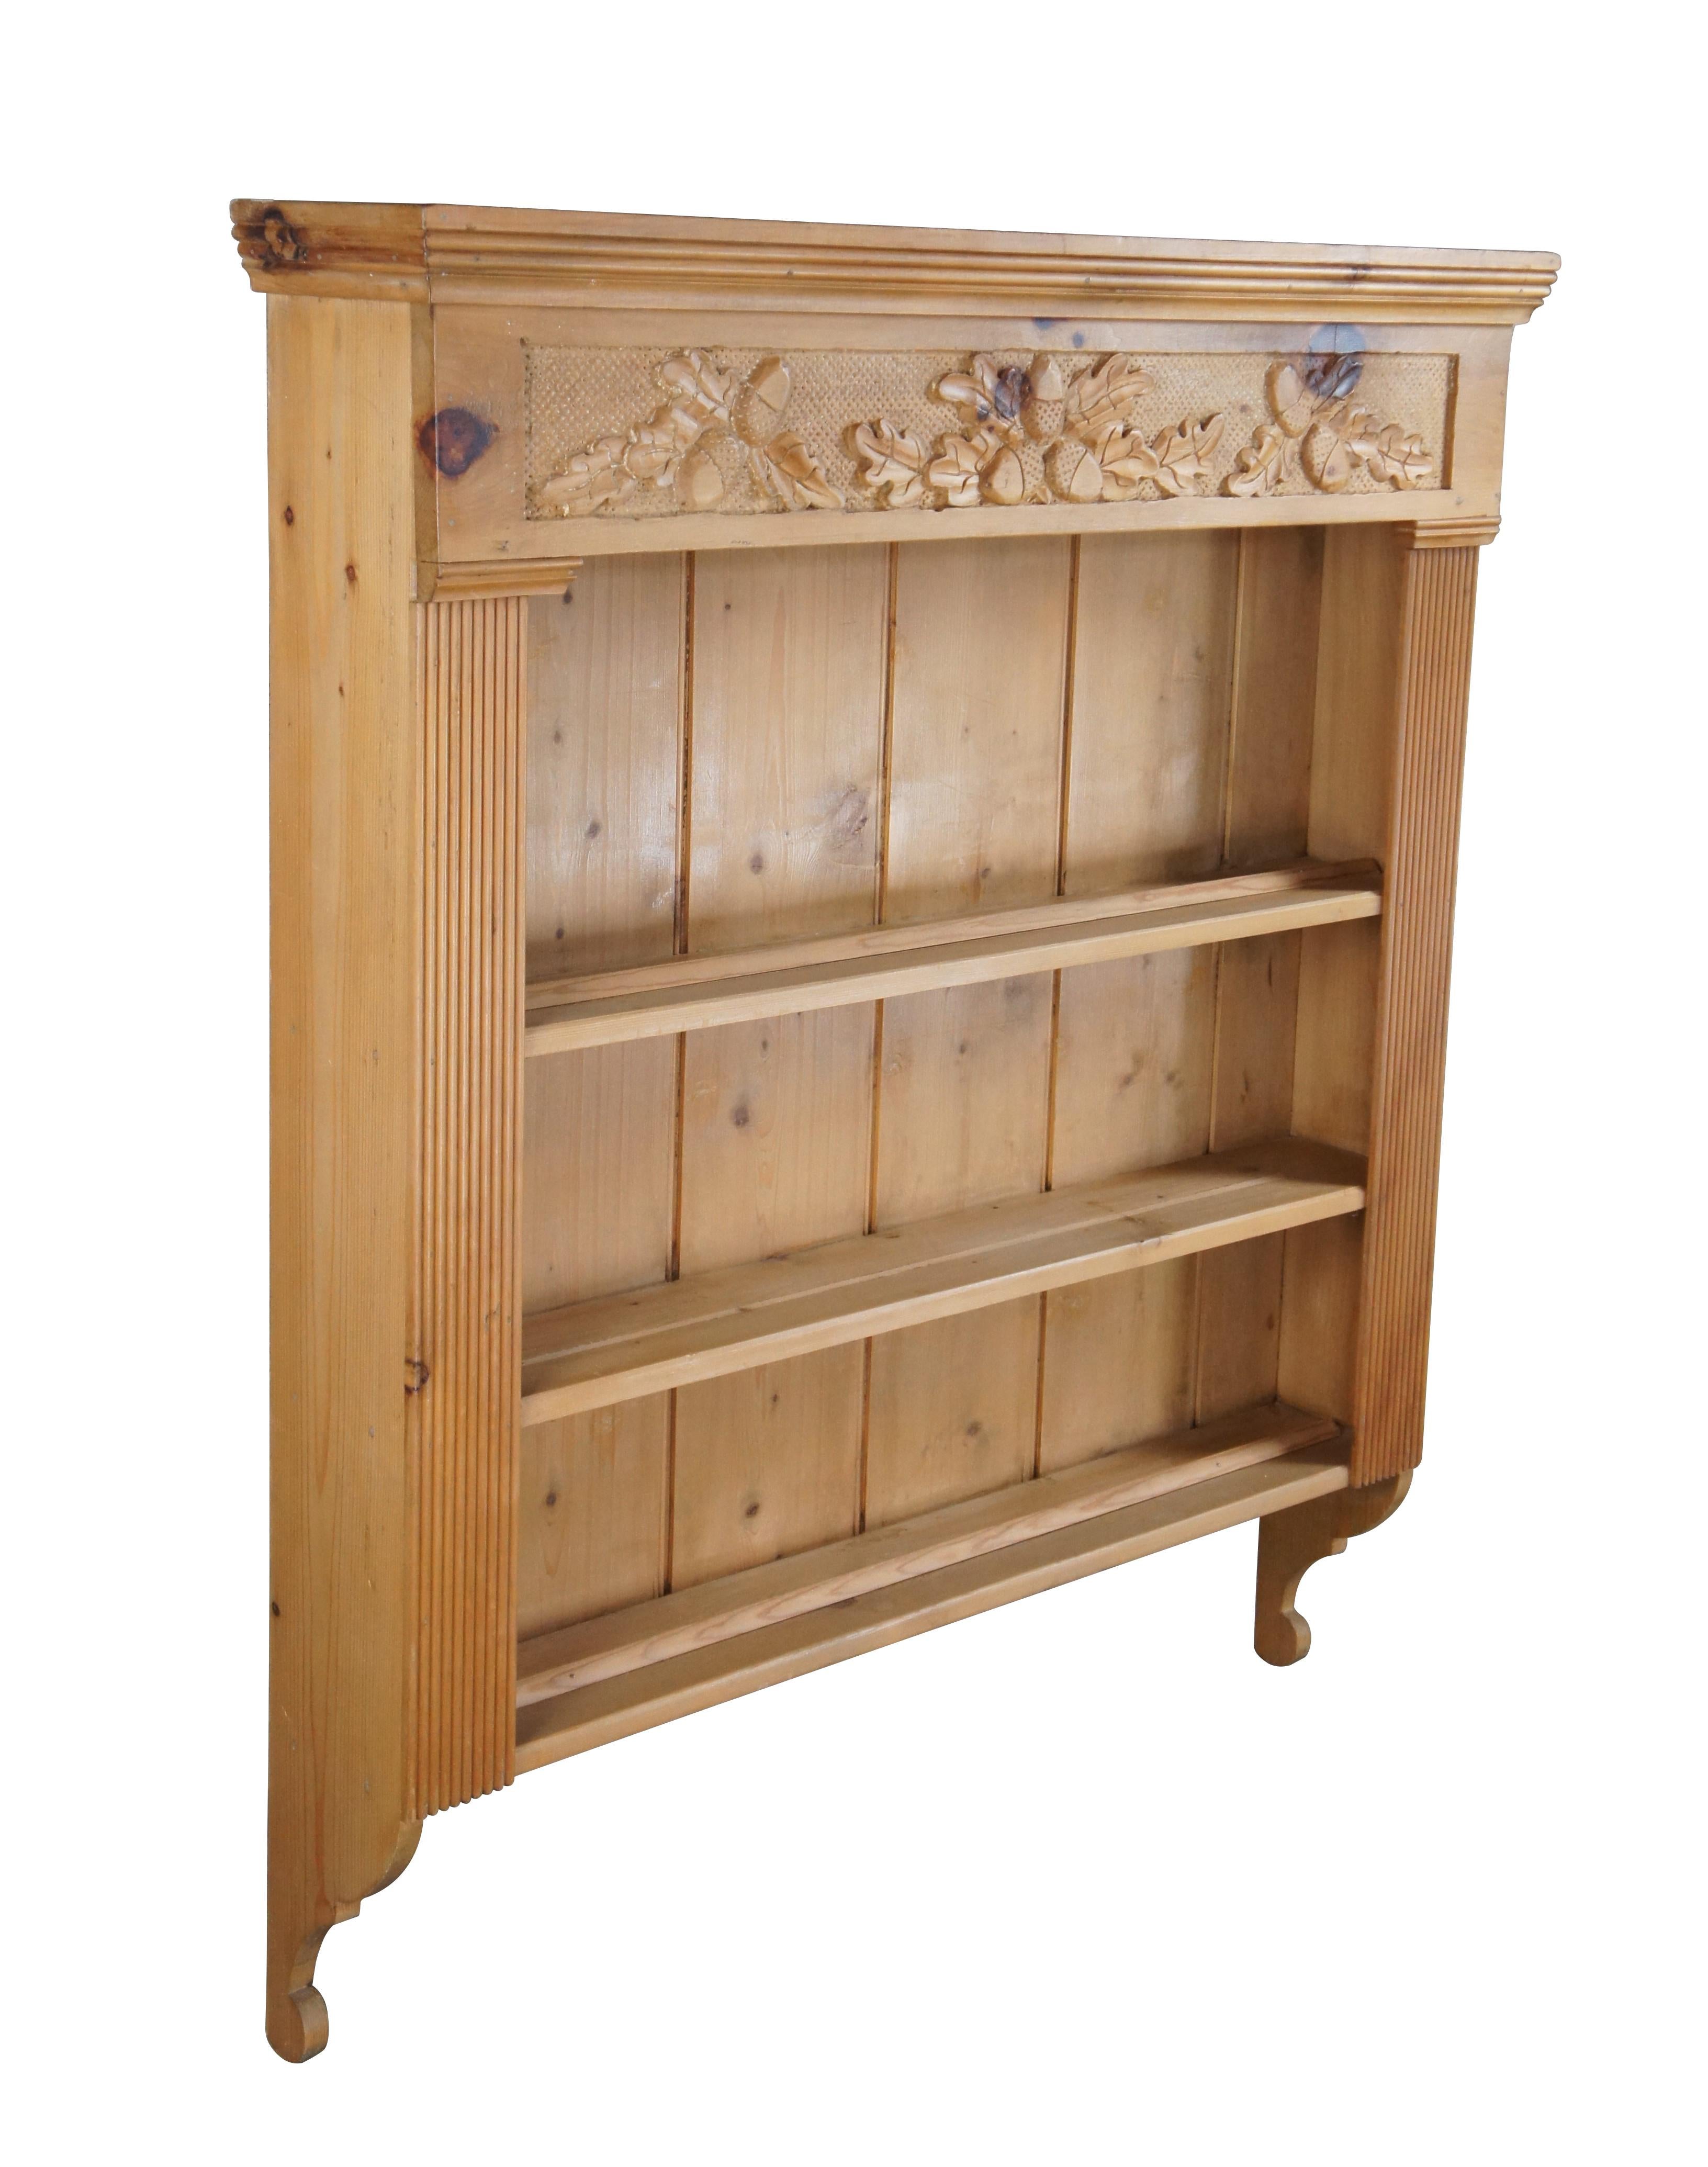 Very large vintage Garcia Imports country farmhouse wall shelf / book shelf / plate display rack.  Made of pine featuring English styling with acorn and leaf theme carving and three tiered shelves flanked by fluted moulding.

Dimensions:
41